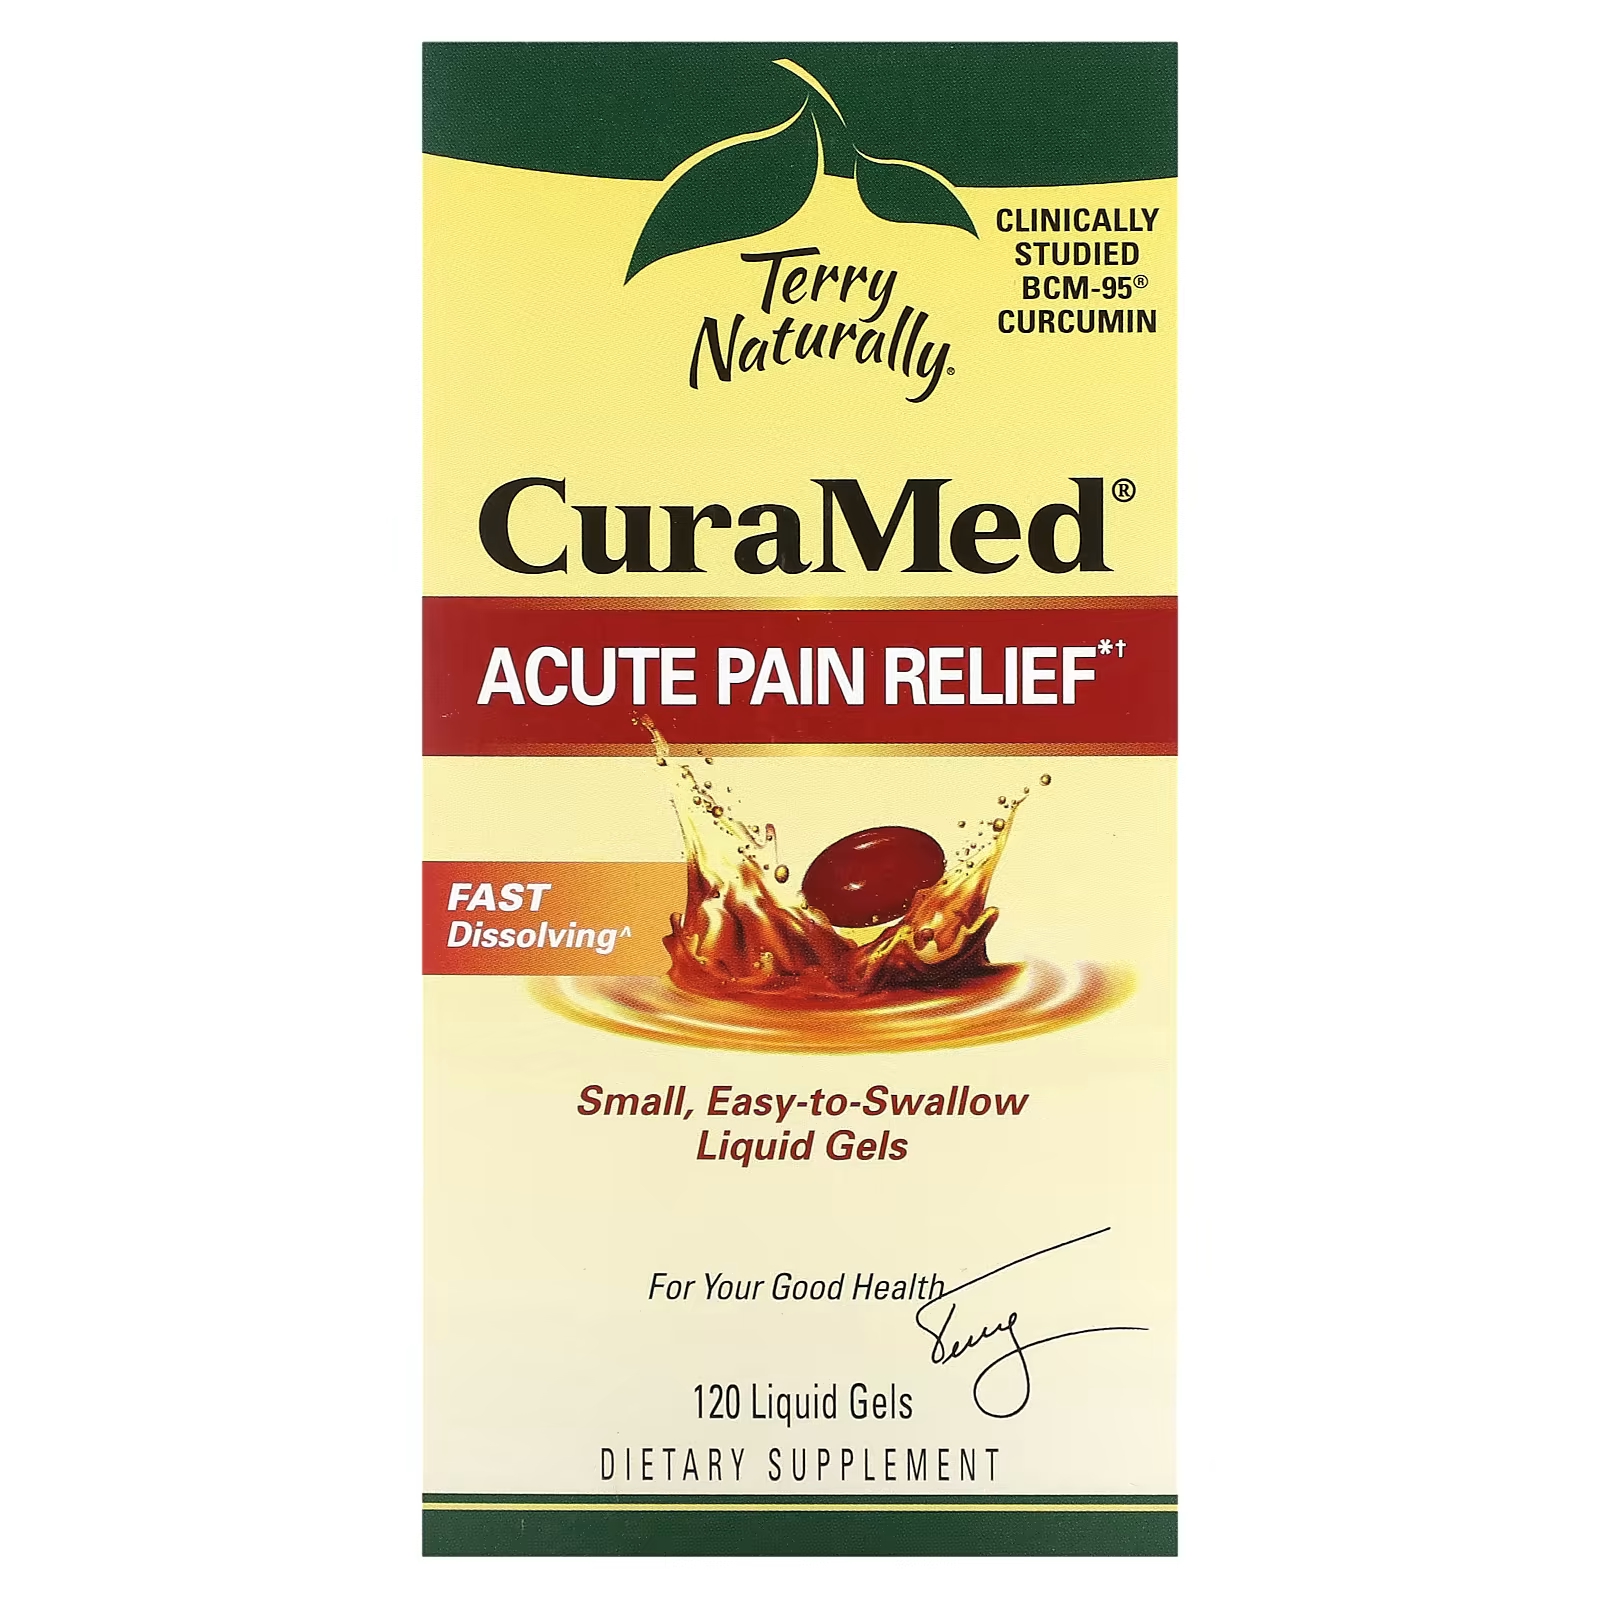 Средство от острой боли Terry Naturally CuraMed, 120 жидких гелей 8pcs tiger balm pain relief patch fast relief knee pain body aches pains